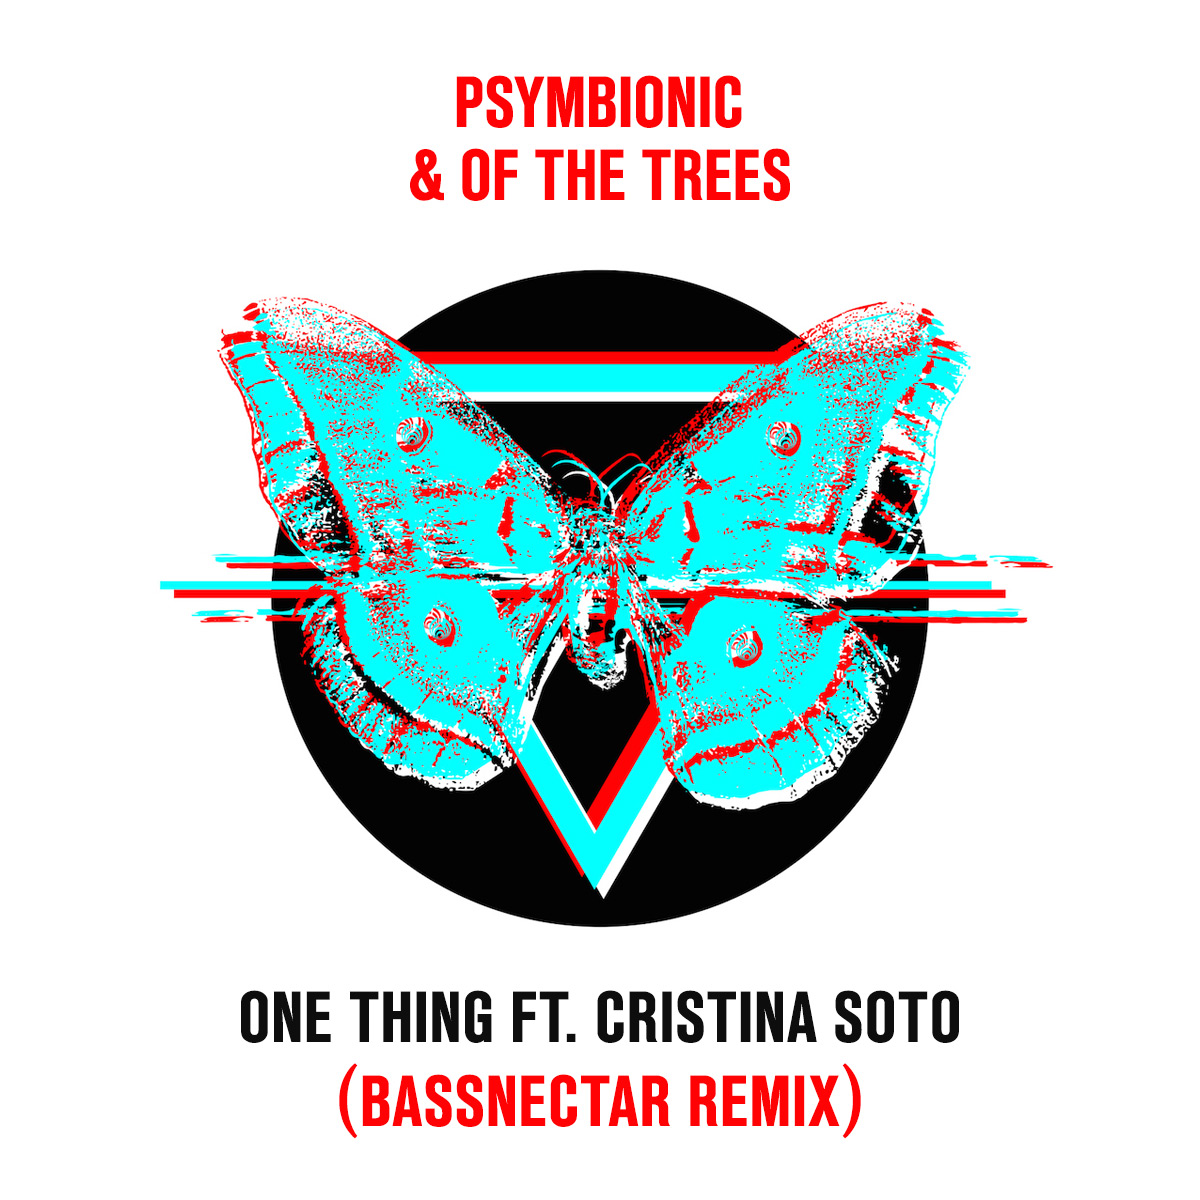 Bassnectar Remixed My Song! WHAT?!